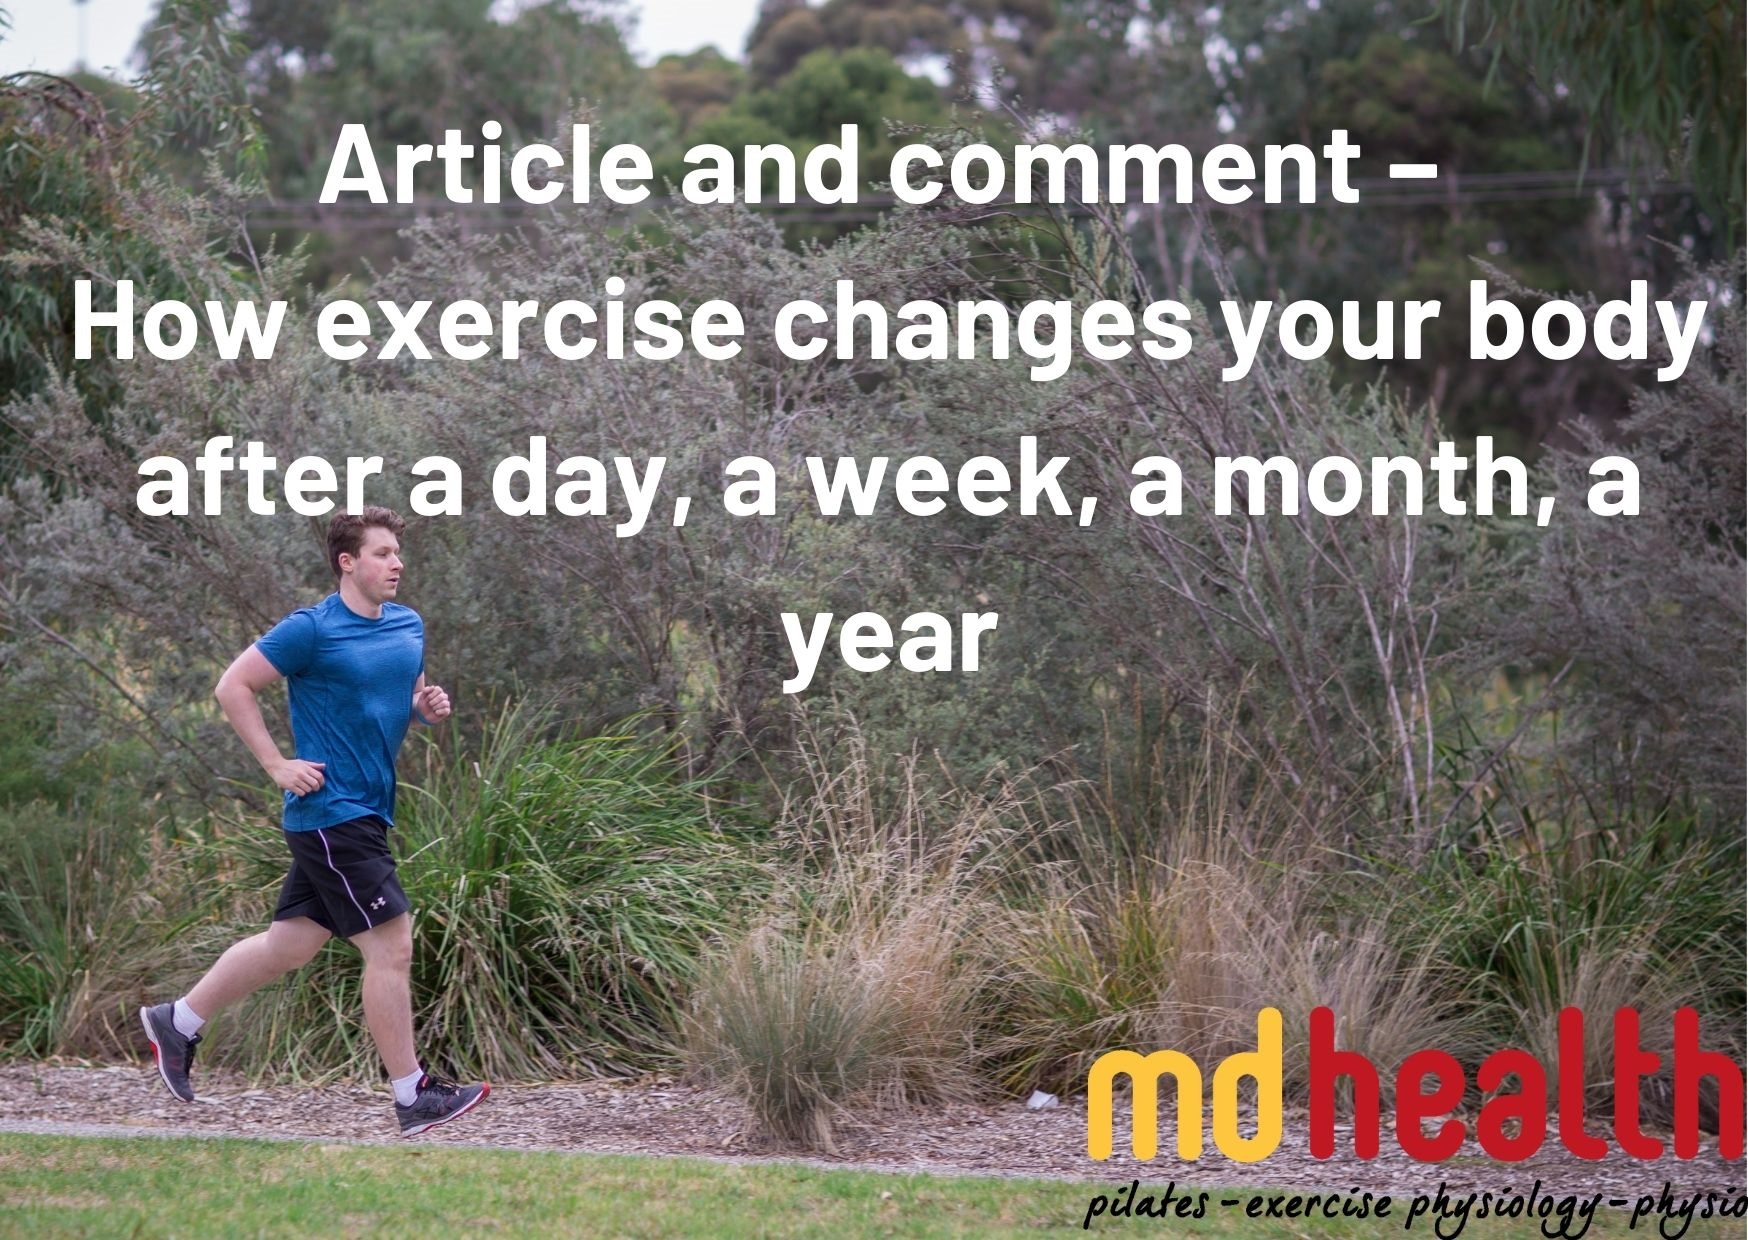 How Exercise Changes Your Body After a Day, a Week, a Month, a